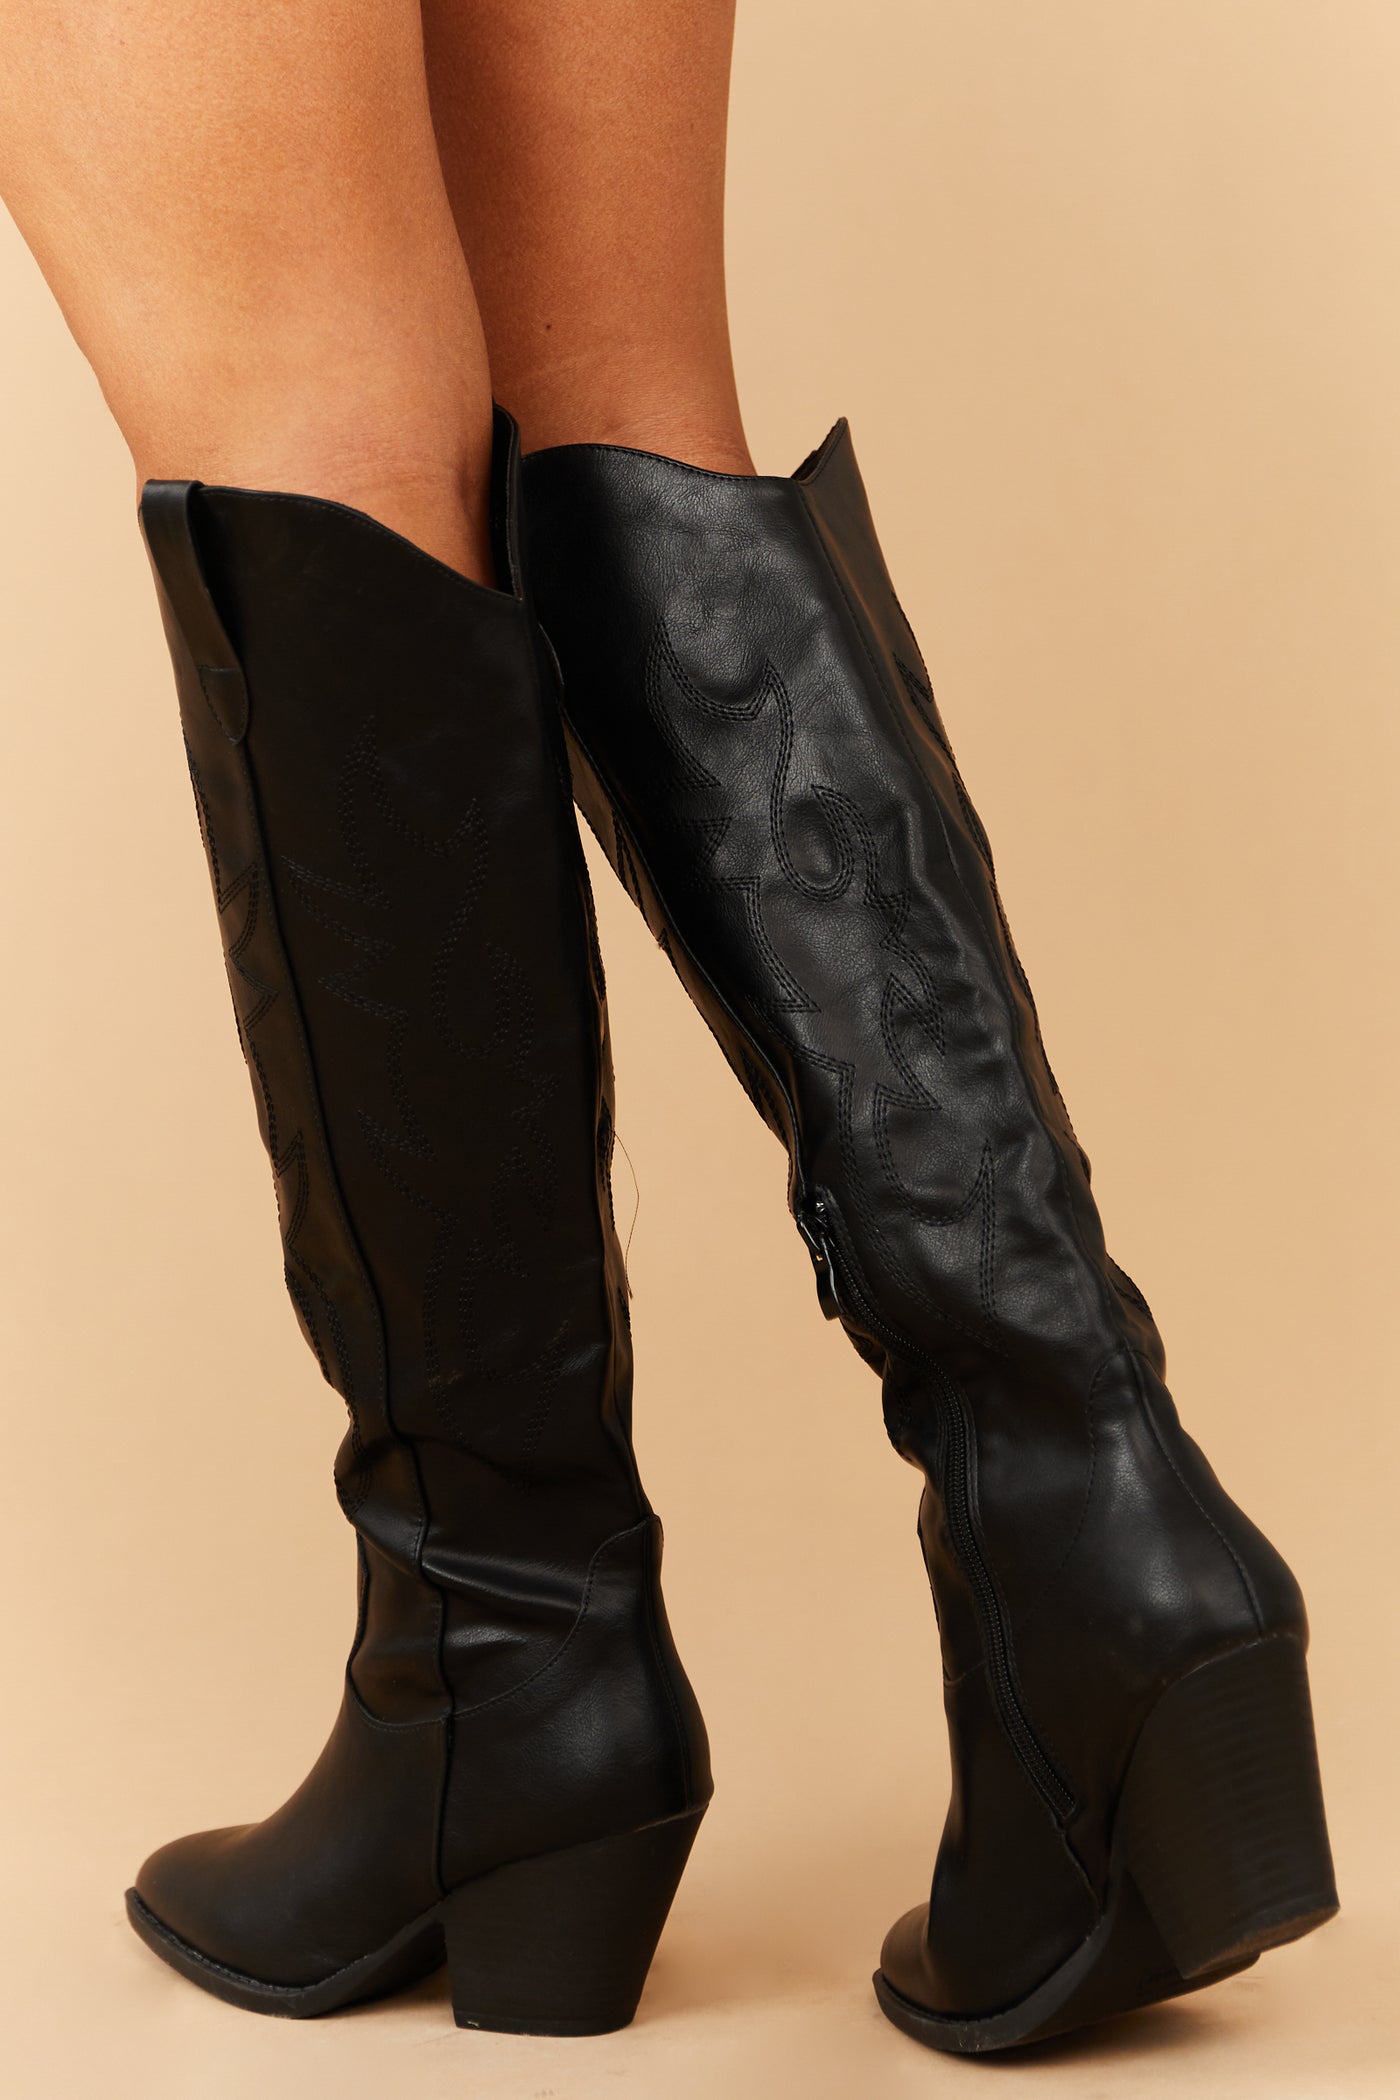 Solid Black Pointed Toe Knee High Western Boots